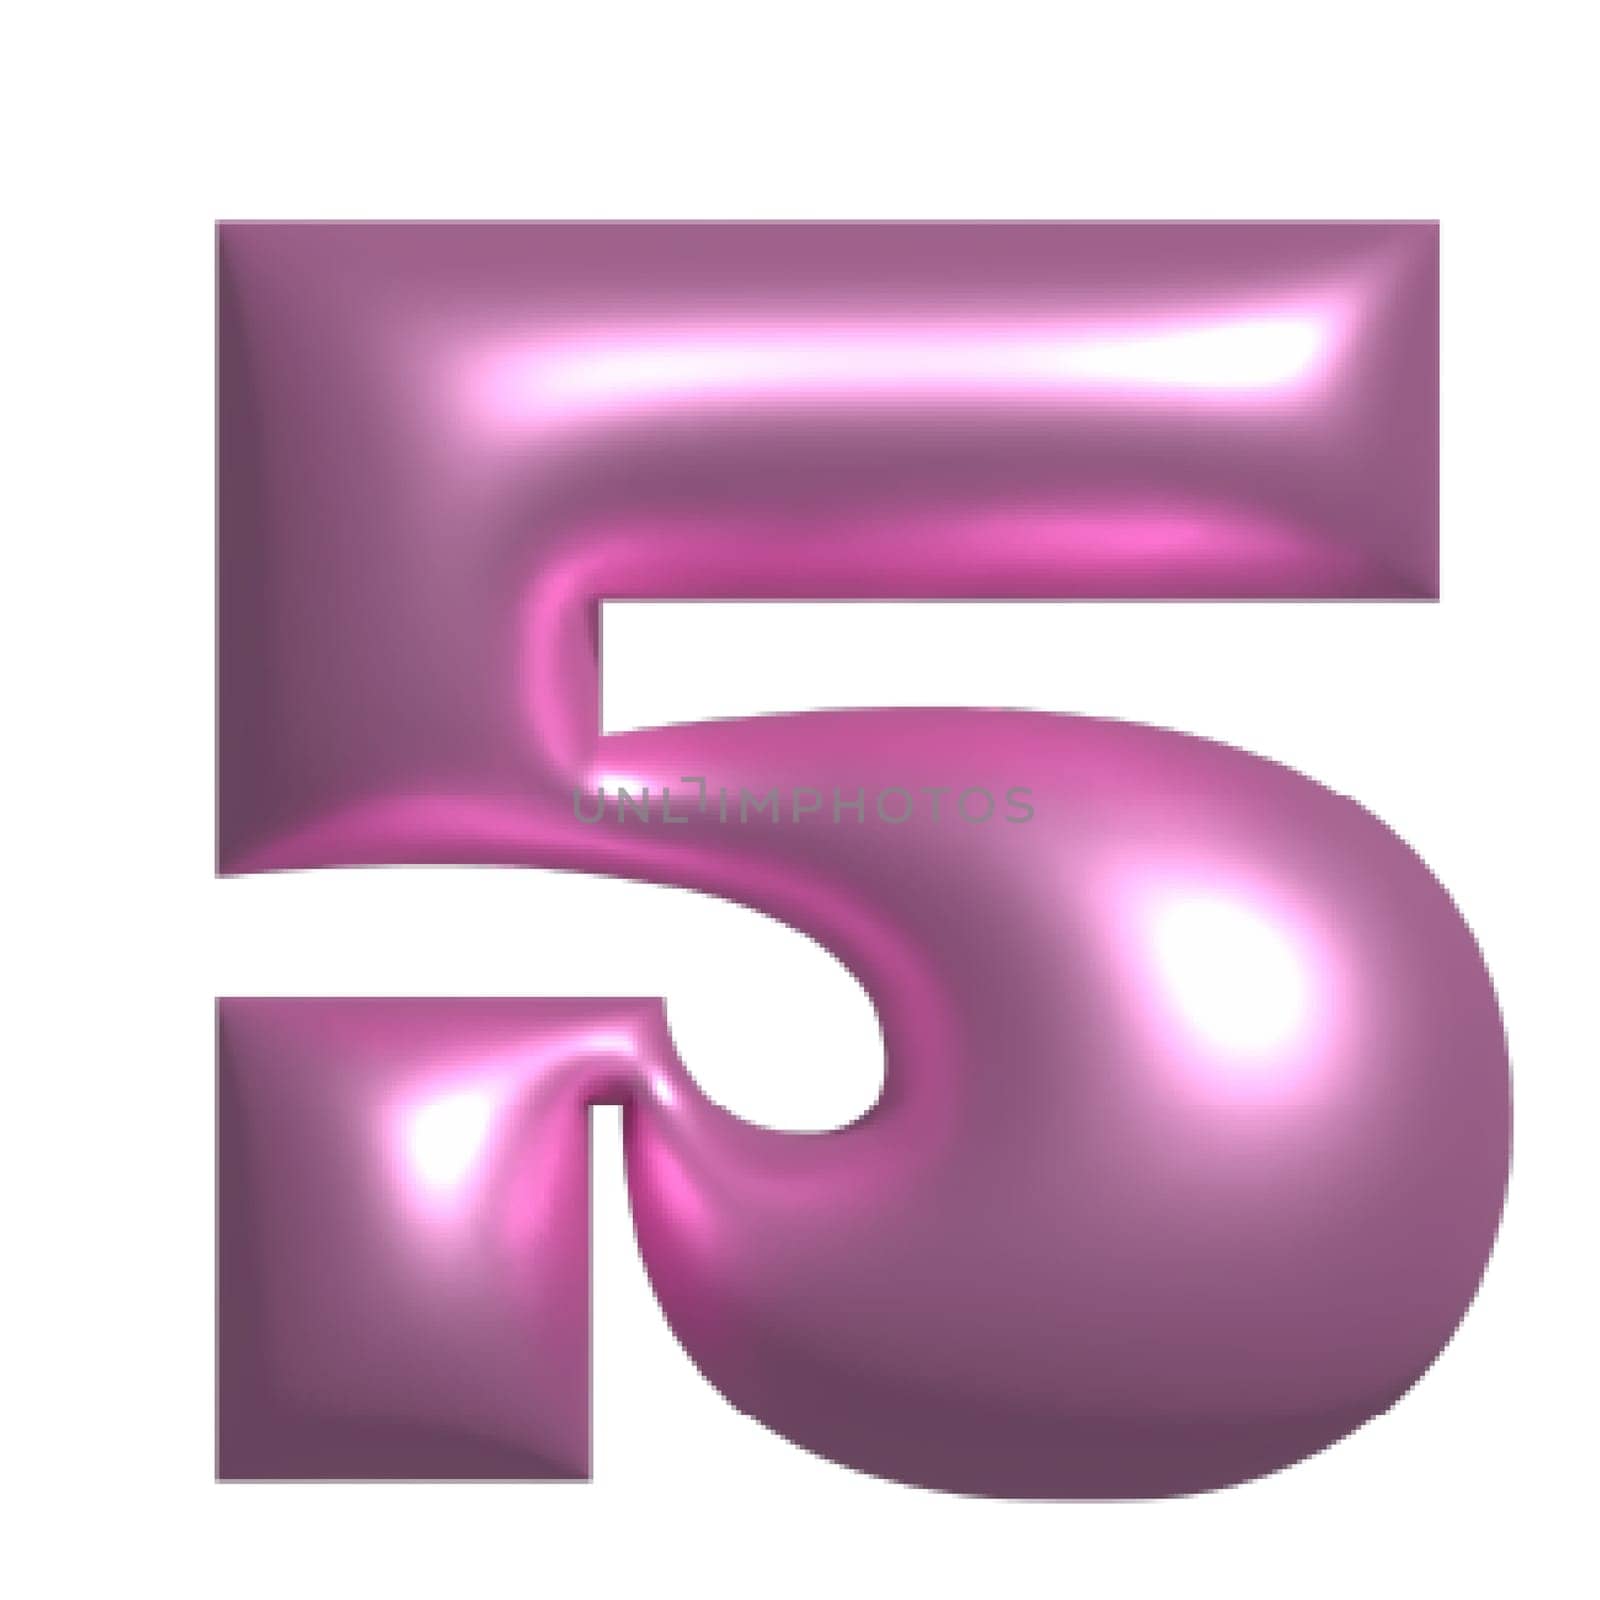 Pink shiny aesthetic metal reflective number 5 3D illustration